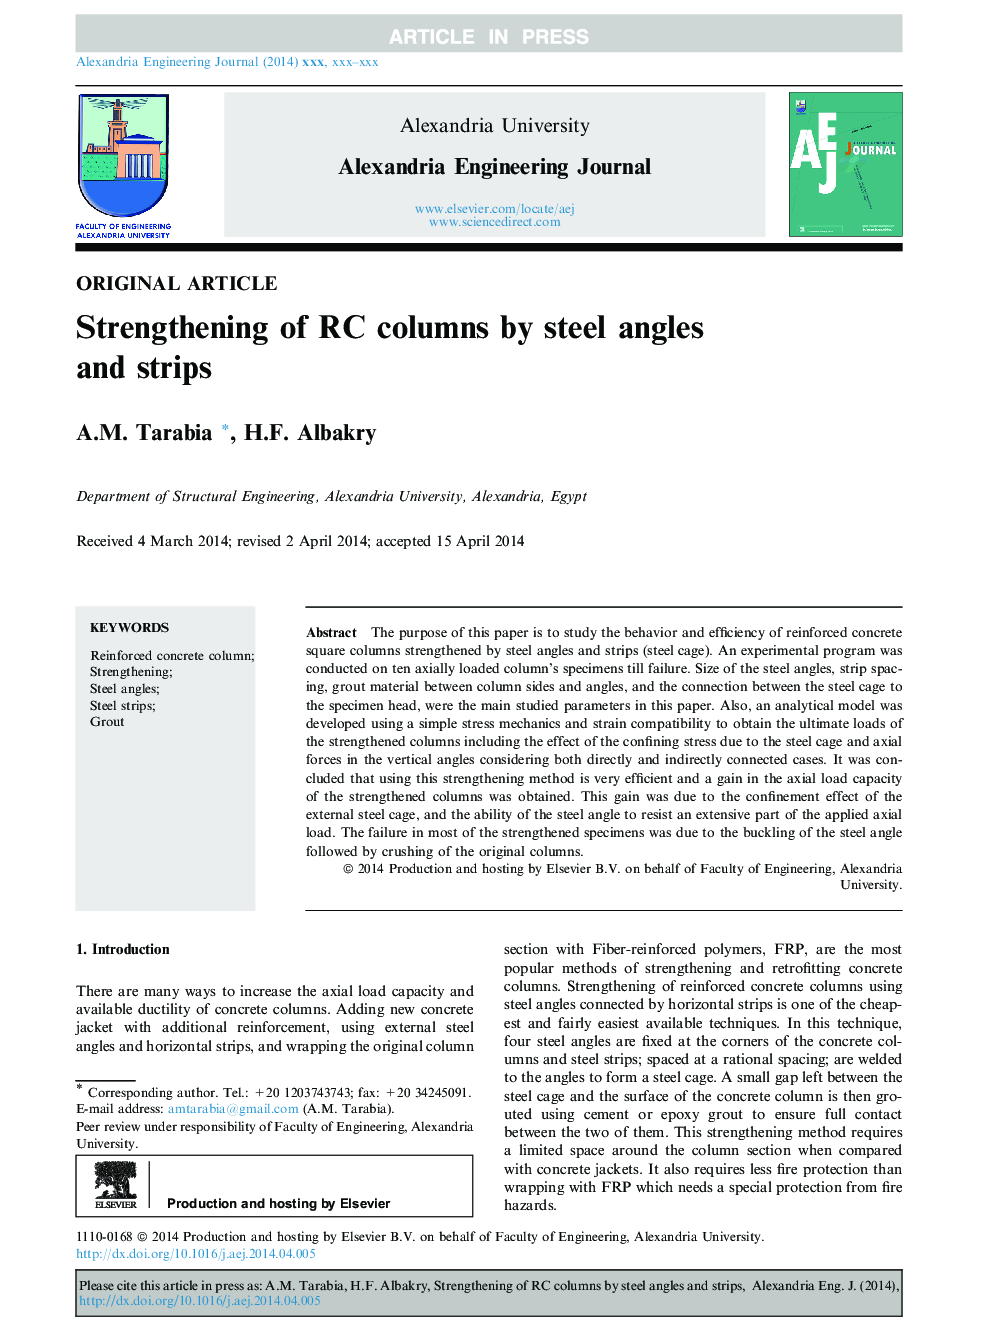 Strengthening of RC columns by steel angles and strips